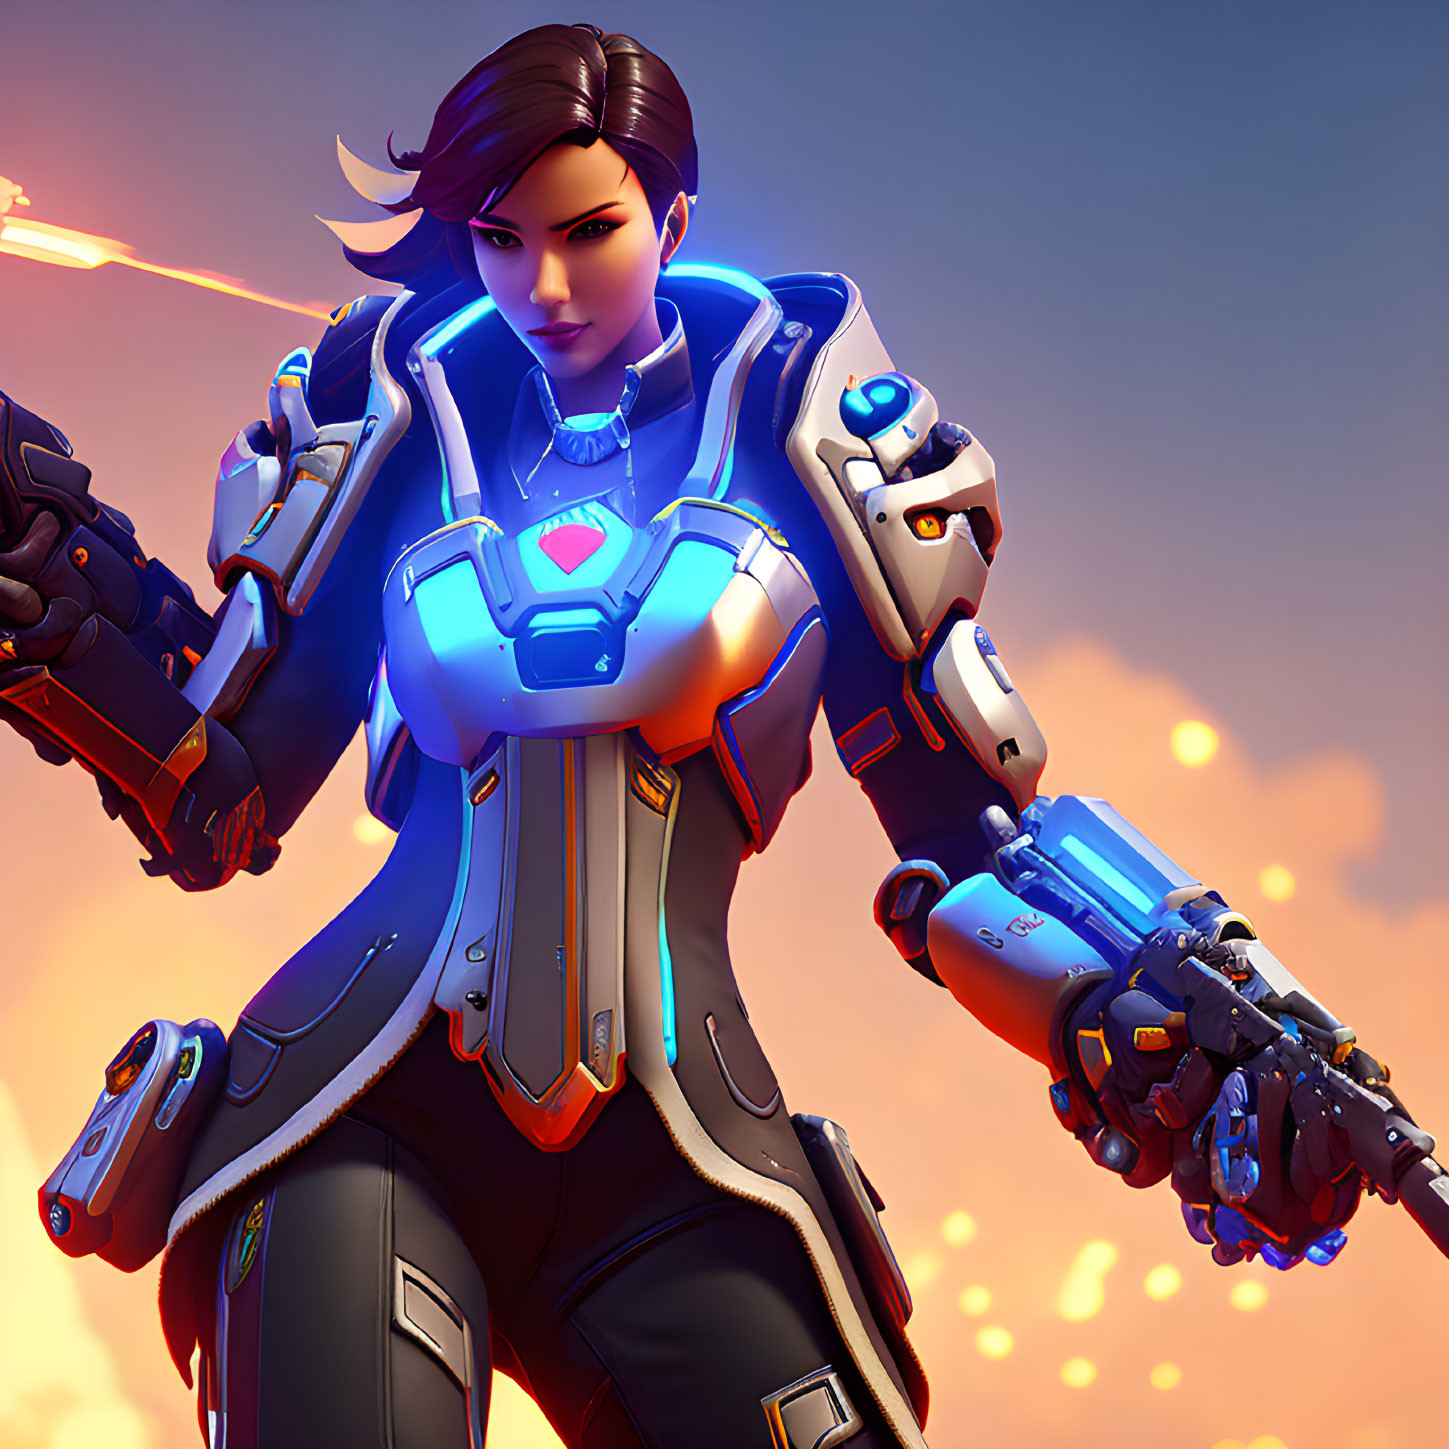 Futuristic 3D Animated Female Character in Blue and White Armor with Energy Pistols